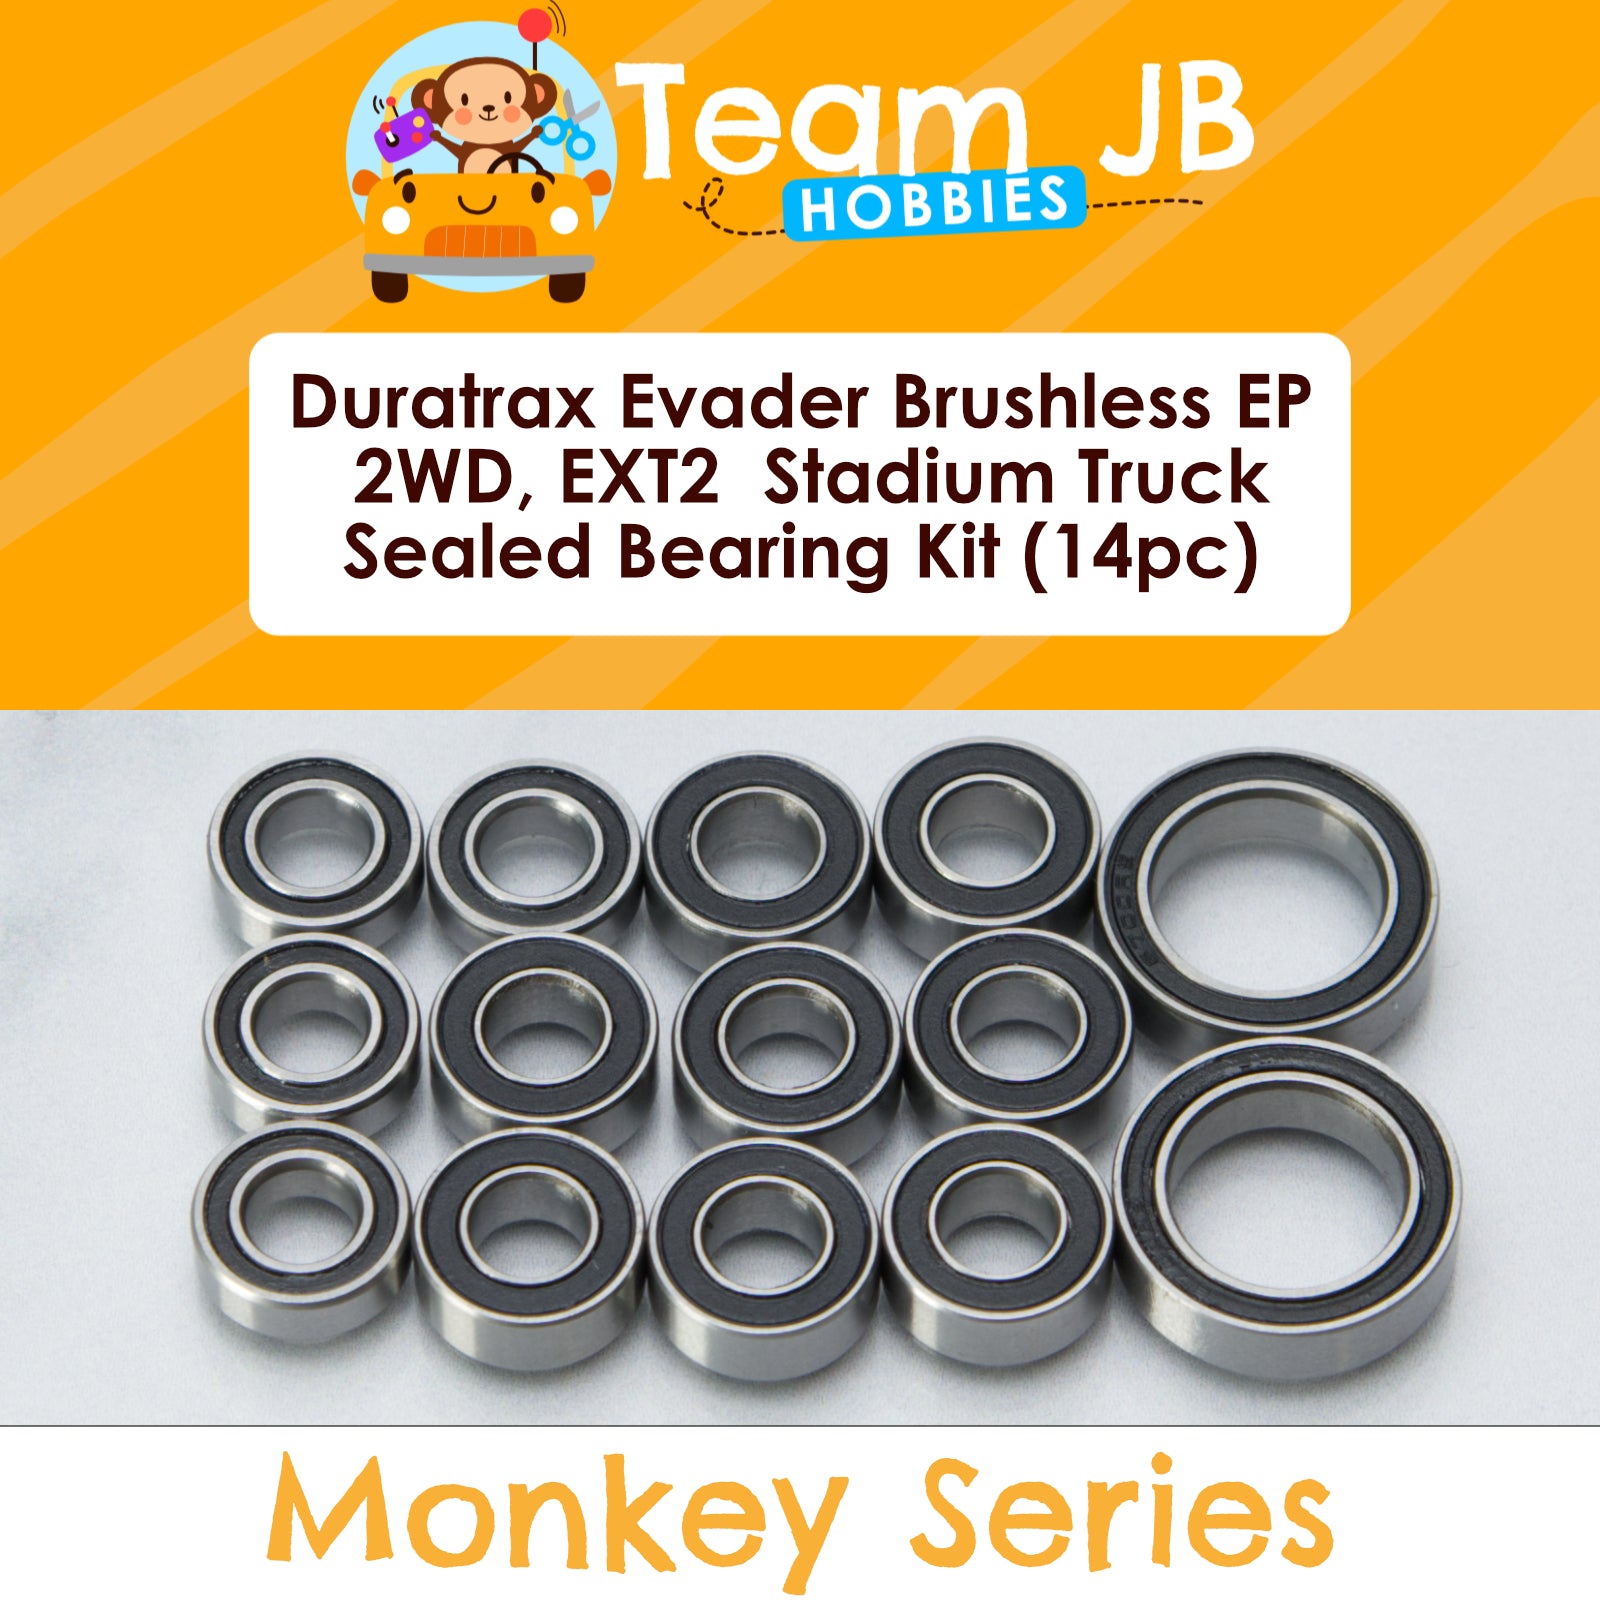 Duratrax Evader Brushless EP 2WD, Evader EXT2 Stadium Truck 2WD - Sealed Bearing Kit